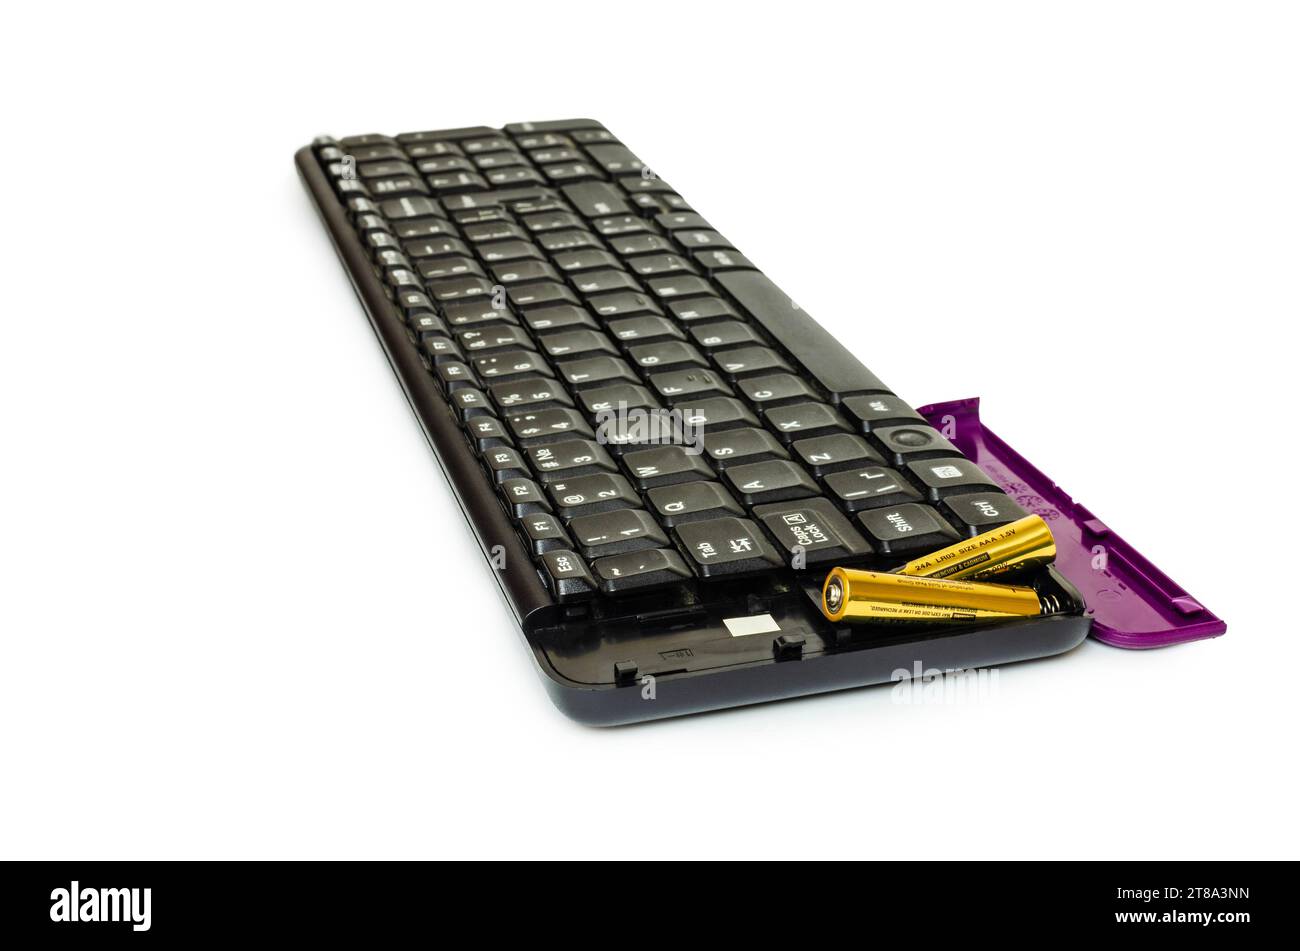 Black wireless keyboard with purple cover and two batteries. Background white Stock Photo